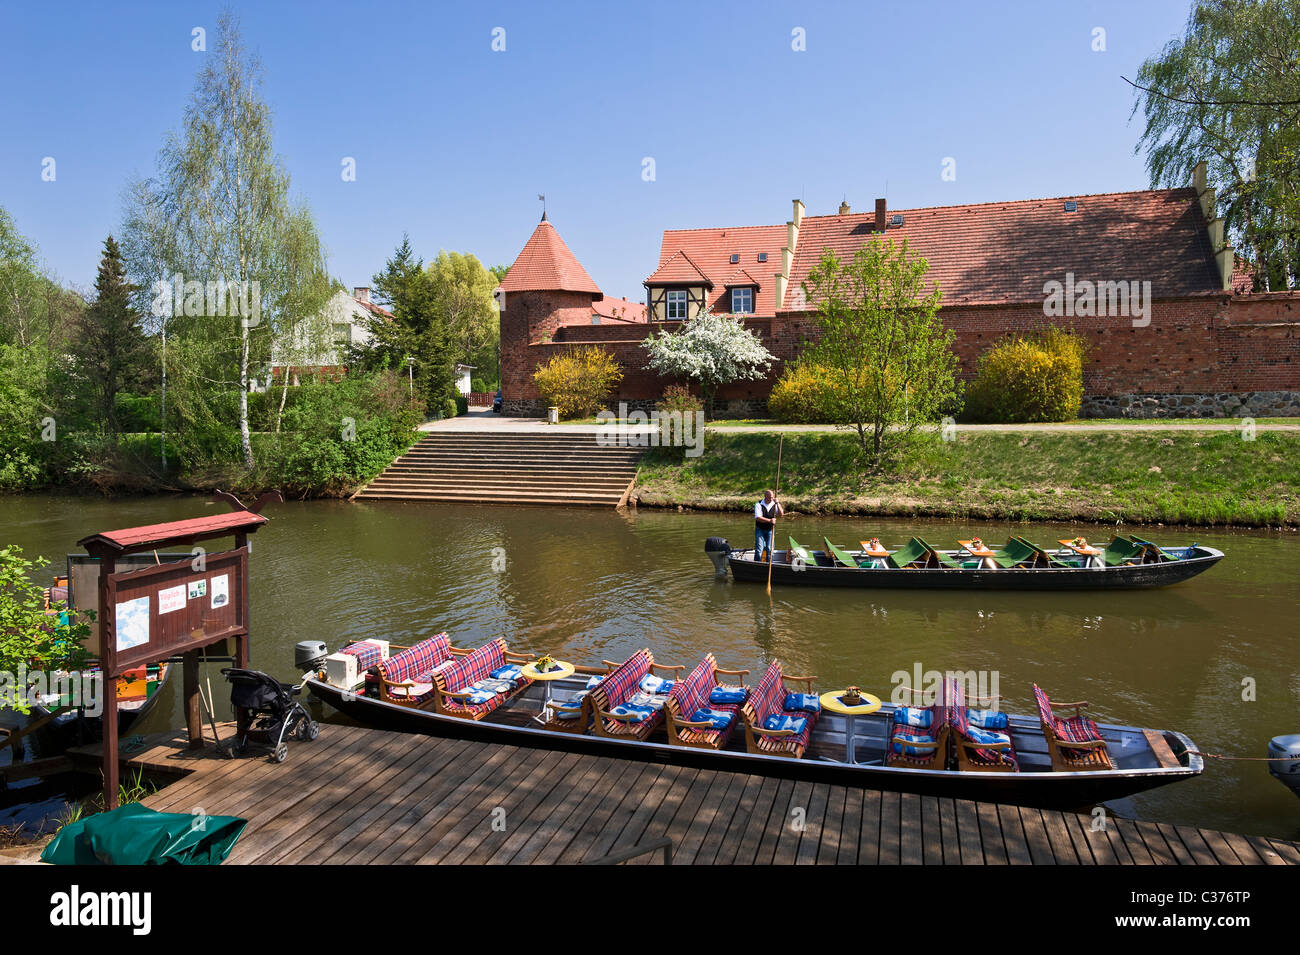 Harbour for barges with historic city walls and Speckturm tower at back, Luebben, Spreewald, Lower Lusatia, Brandenburg, Germany Stock Photo